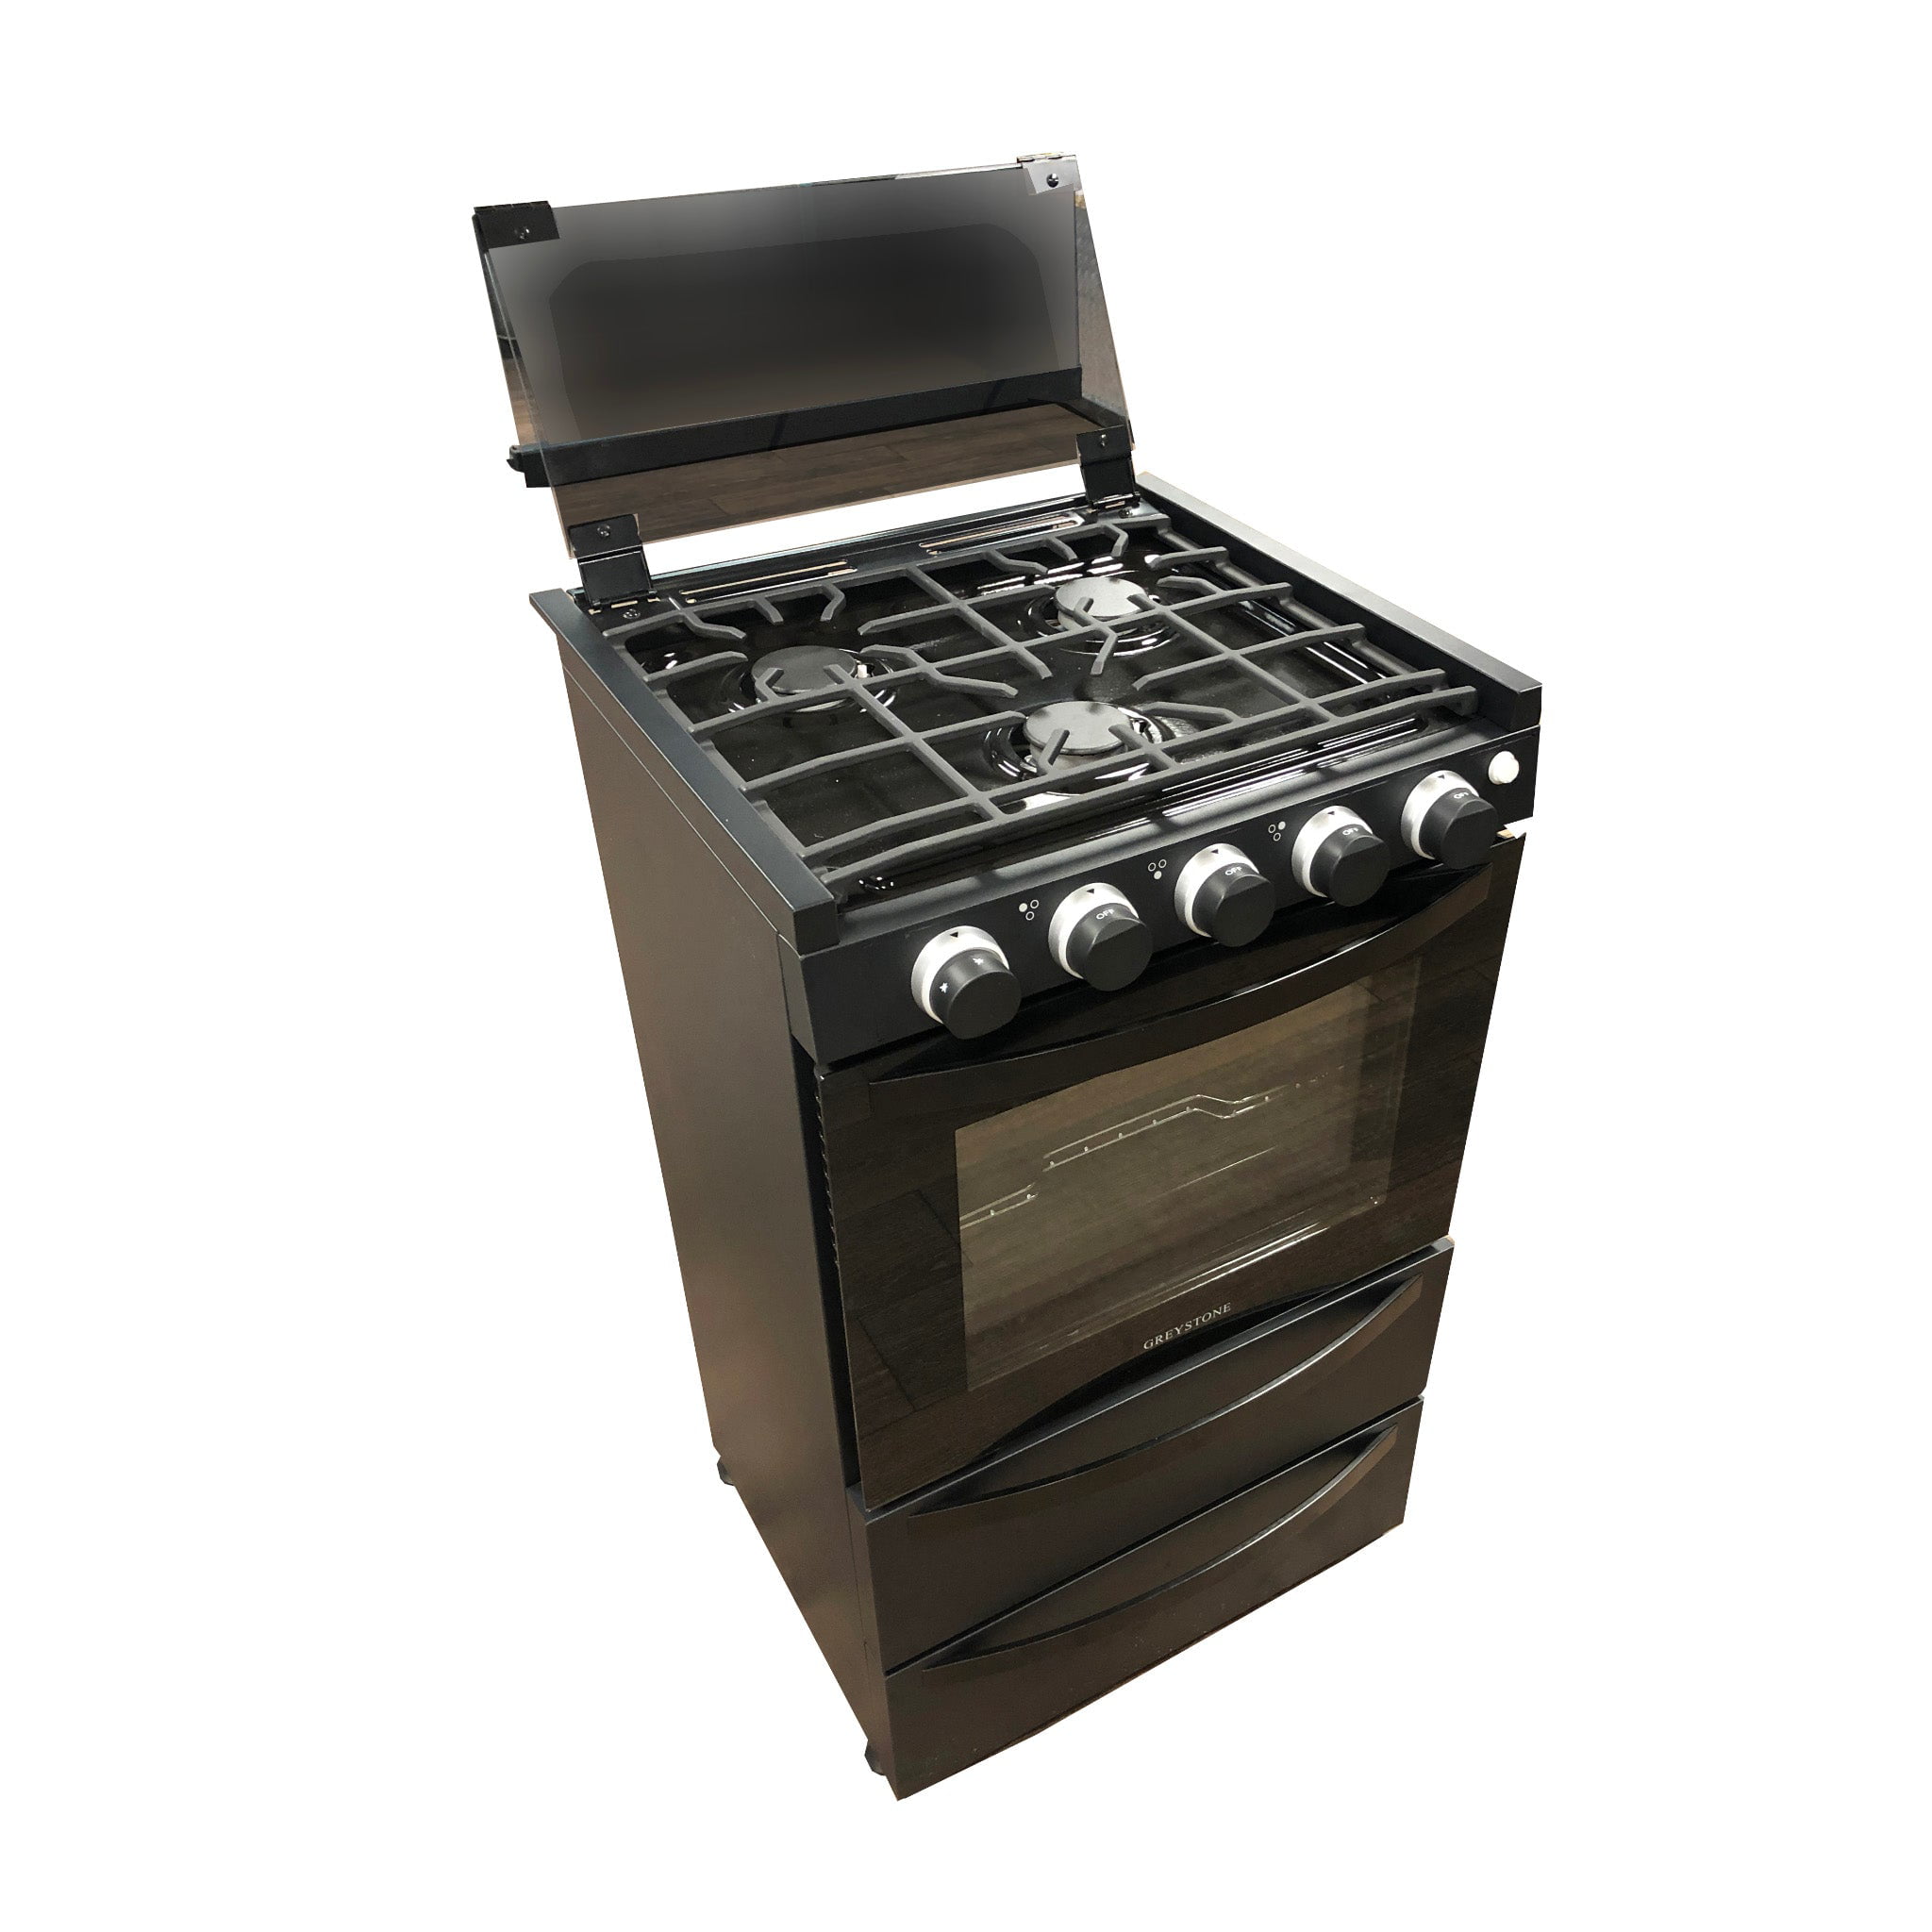 RecPro RV Stove | Gas Range 21 Tall | Optional Vented Range Hood | Black  or Silver Color Options (Silver, No Vented Range Hood)